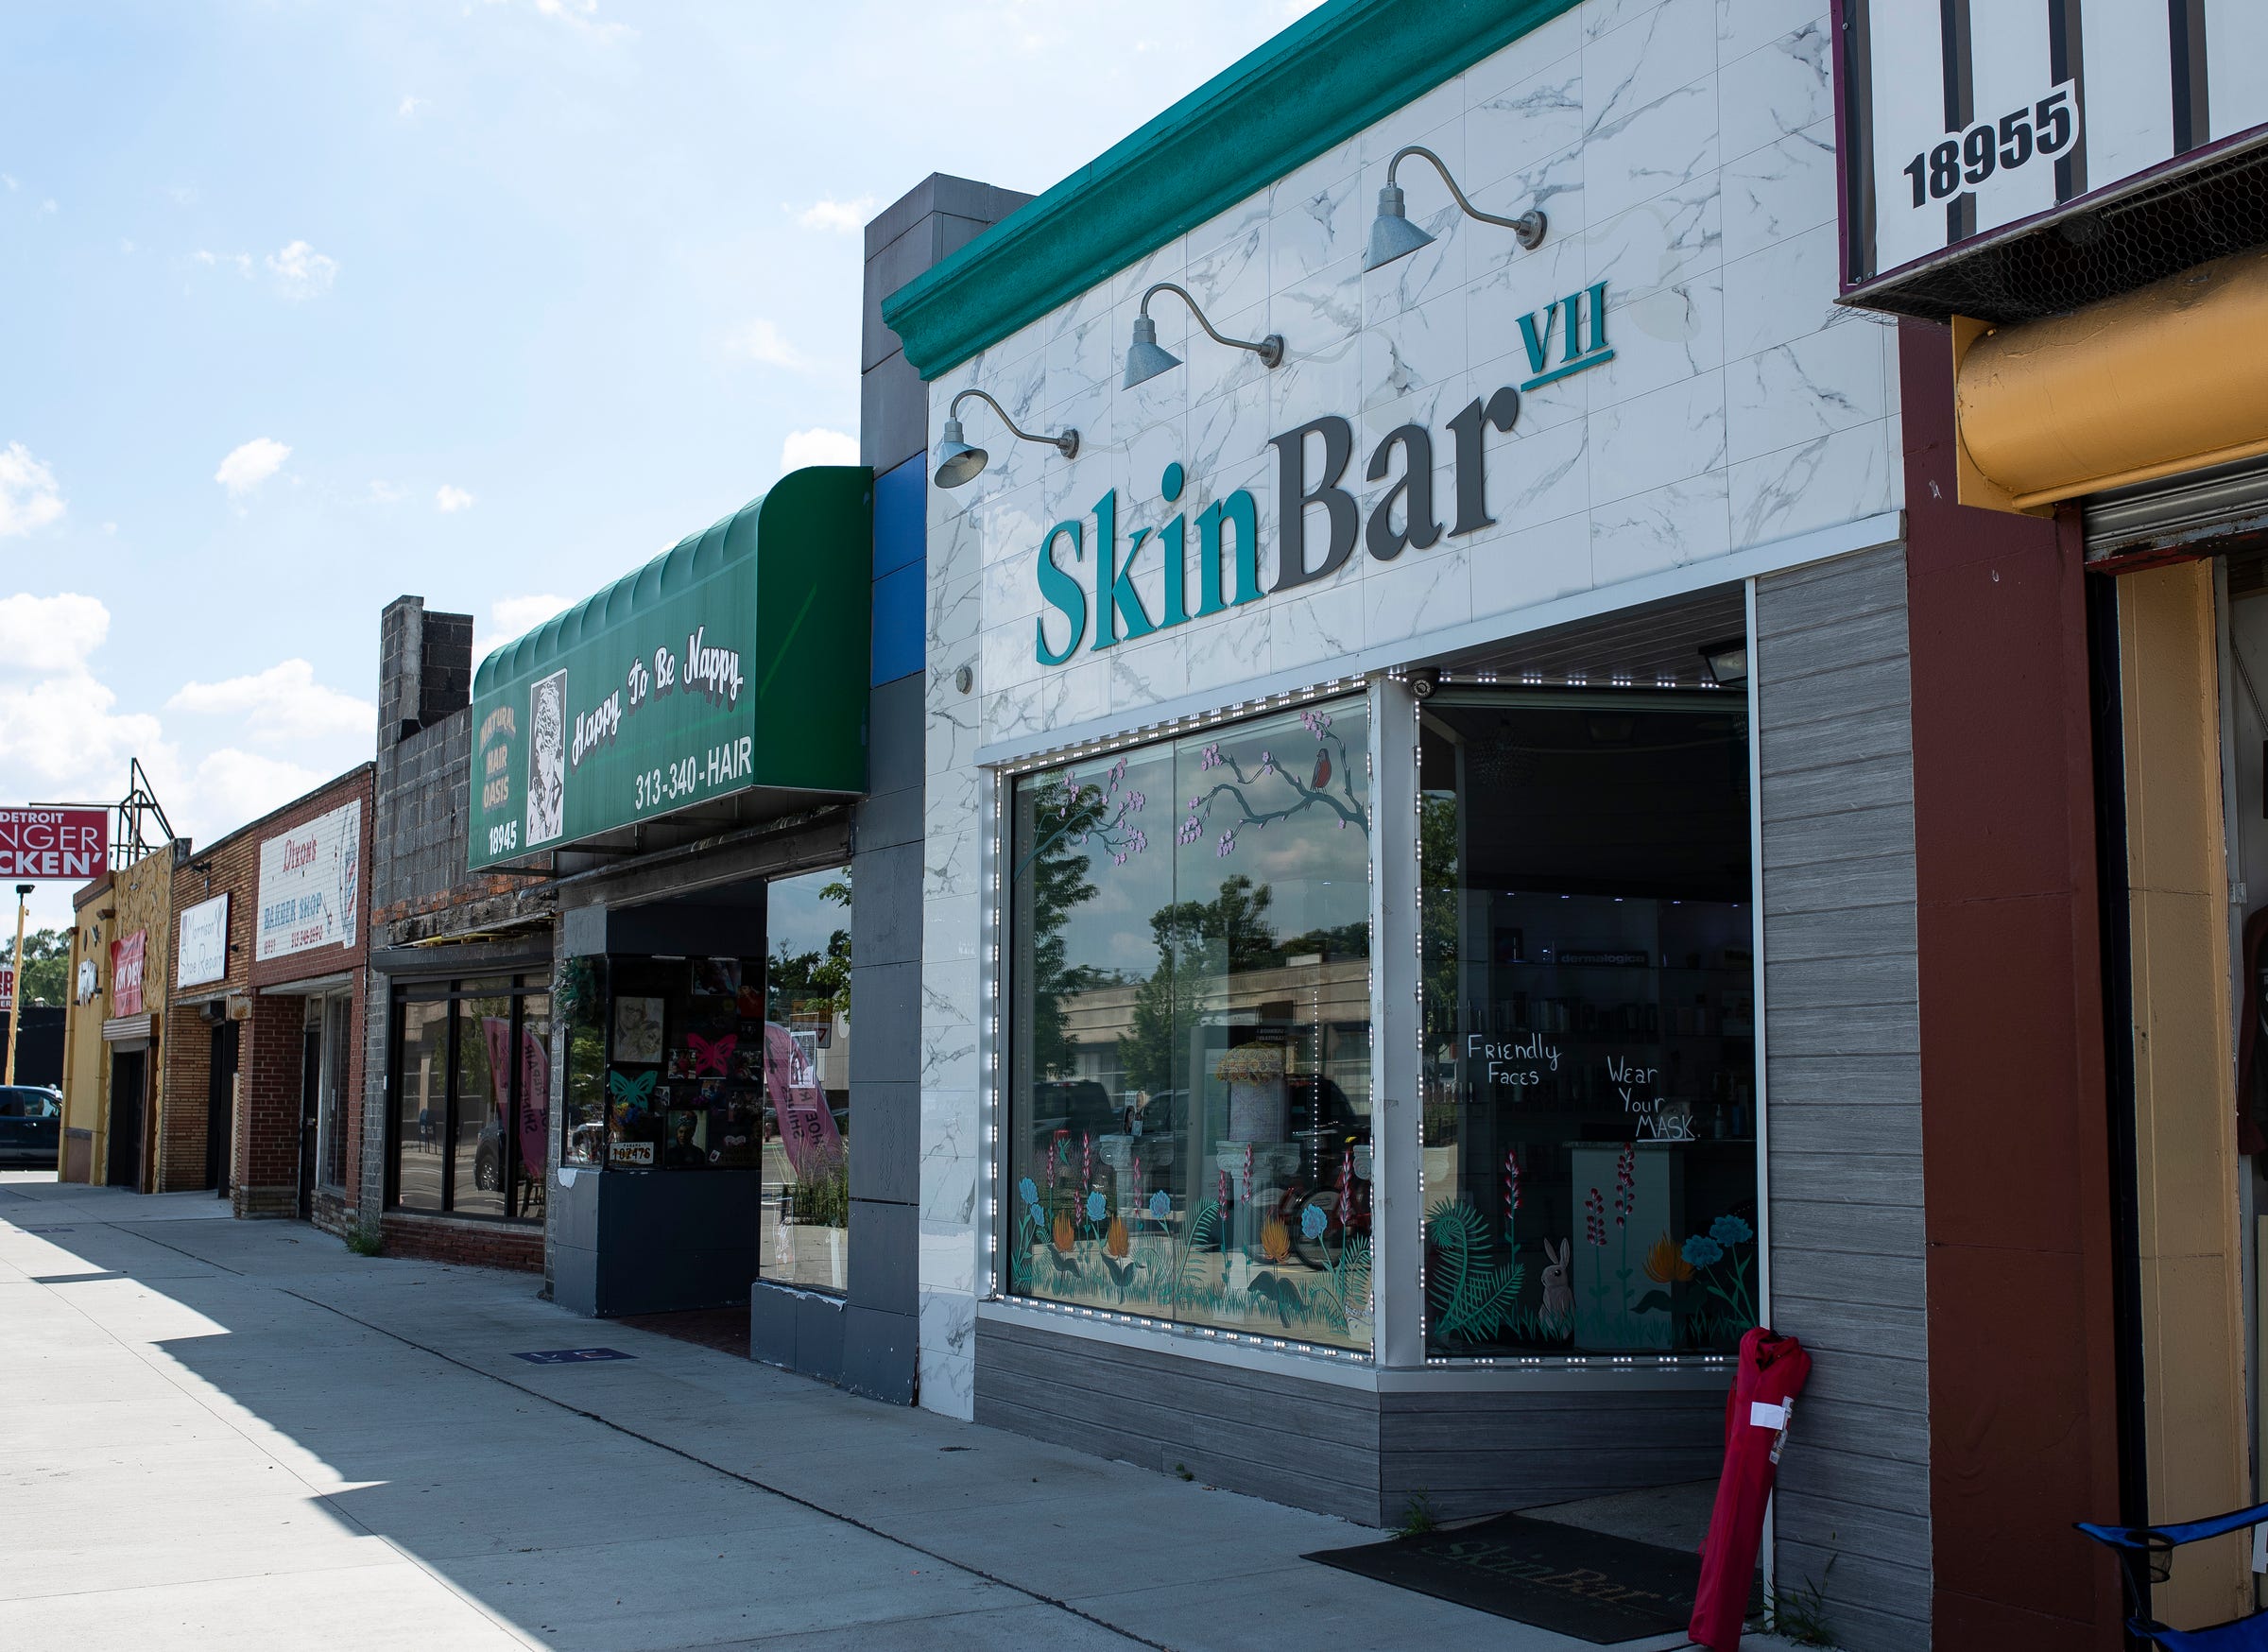 Skin Bar VII is one of many businesses that have opened up on the Livernois Avenue of Fashion in Detroit, on Tues., July 19, 2022. Owner Sevyn Jones hosted the block club meeting.